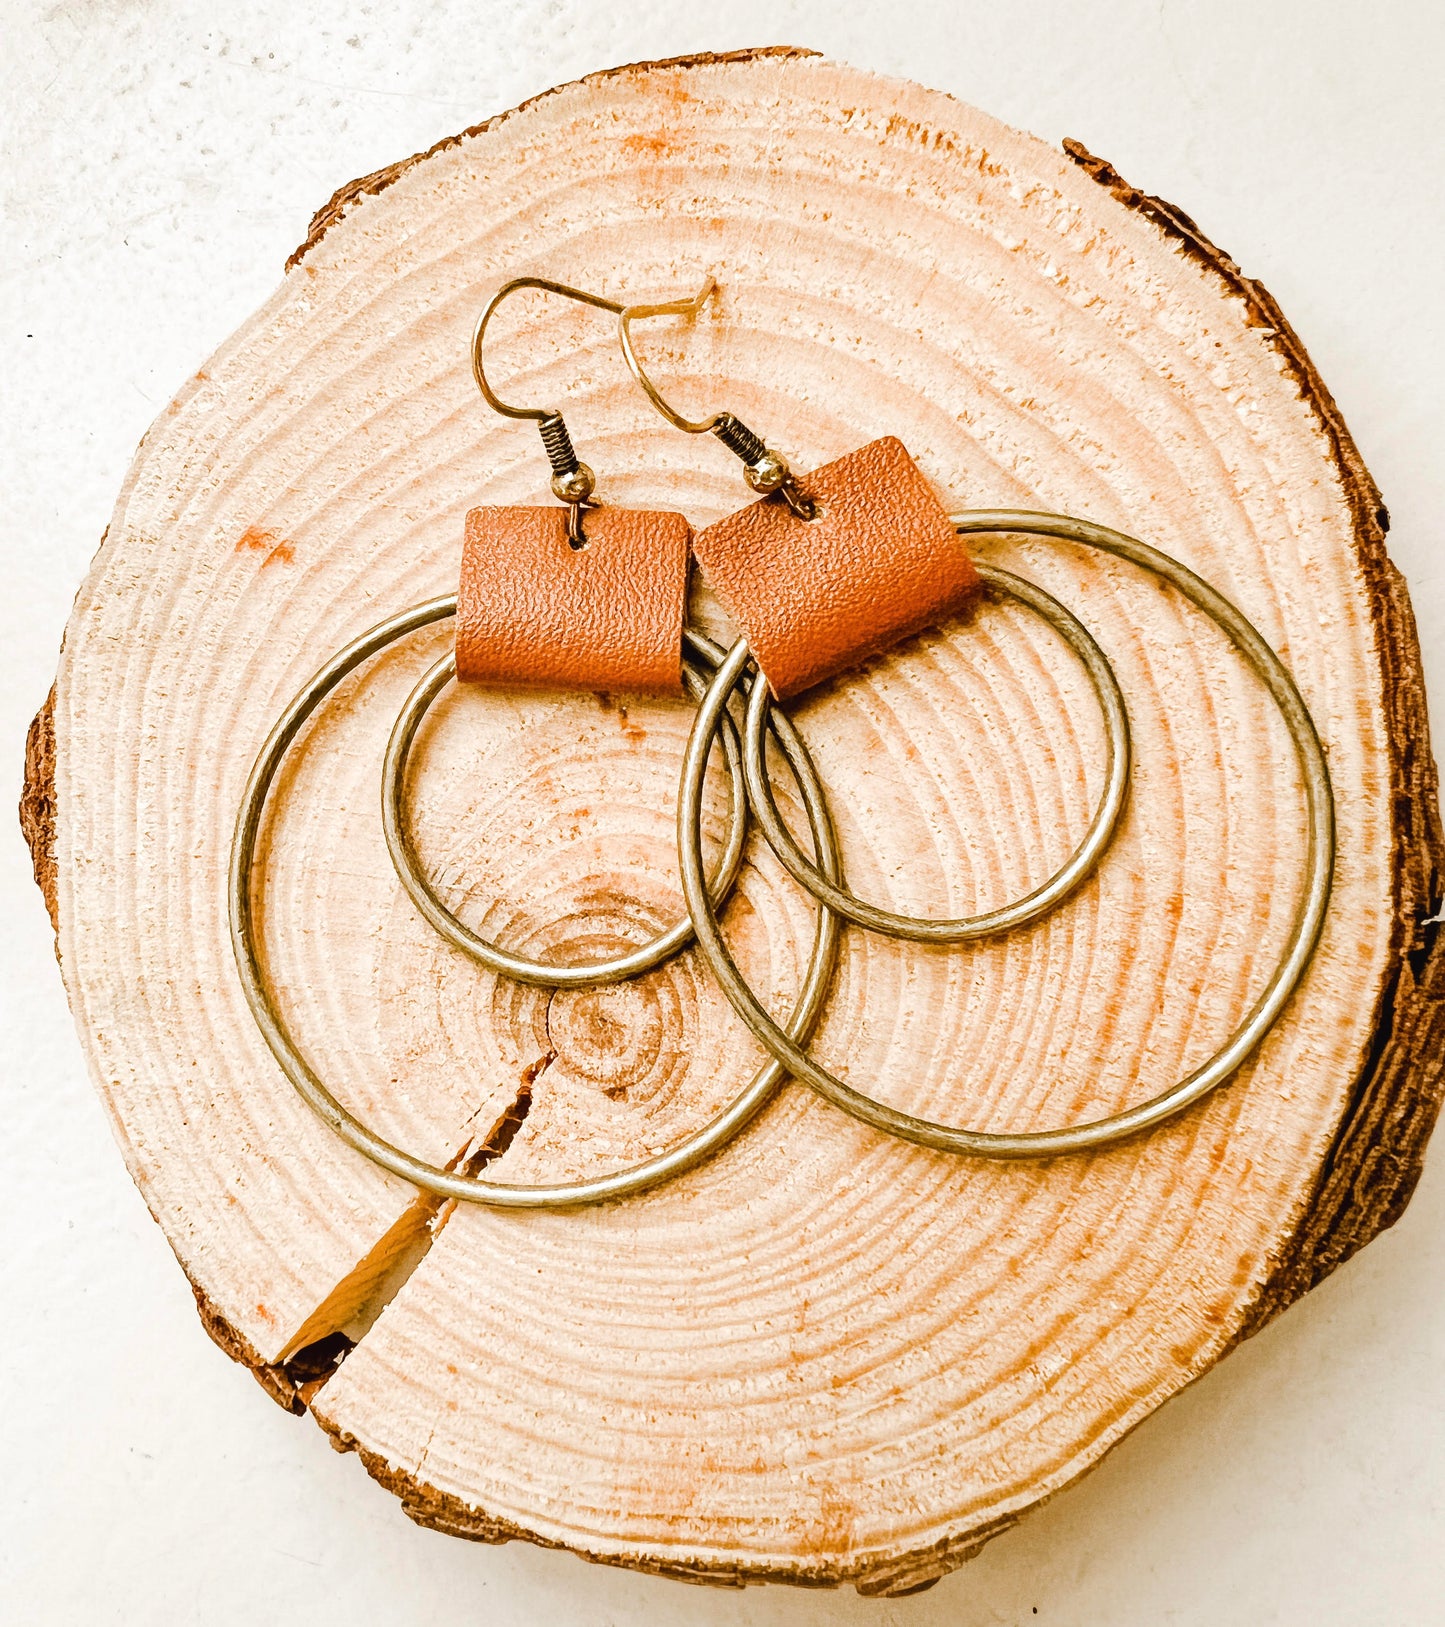 Beautiful Leather and Copper Hoop Earrings